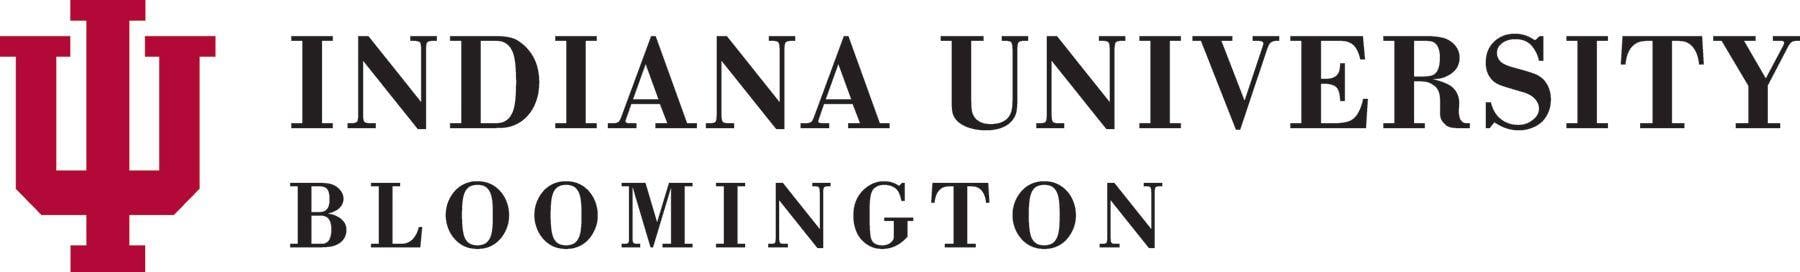 Indiana University Bloomington Logo - Communications: Offices & Services: Departments, Offices & Services